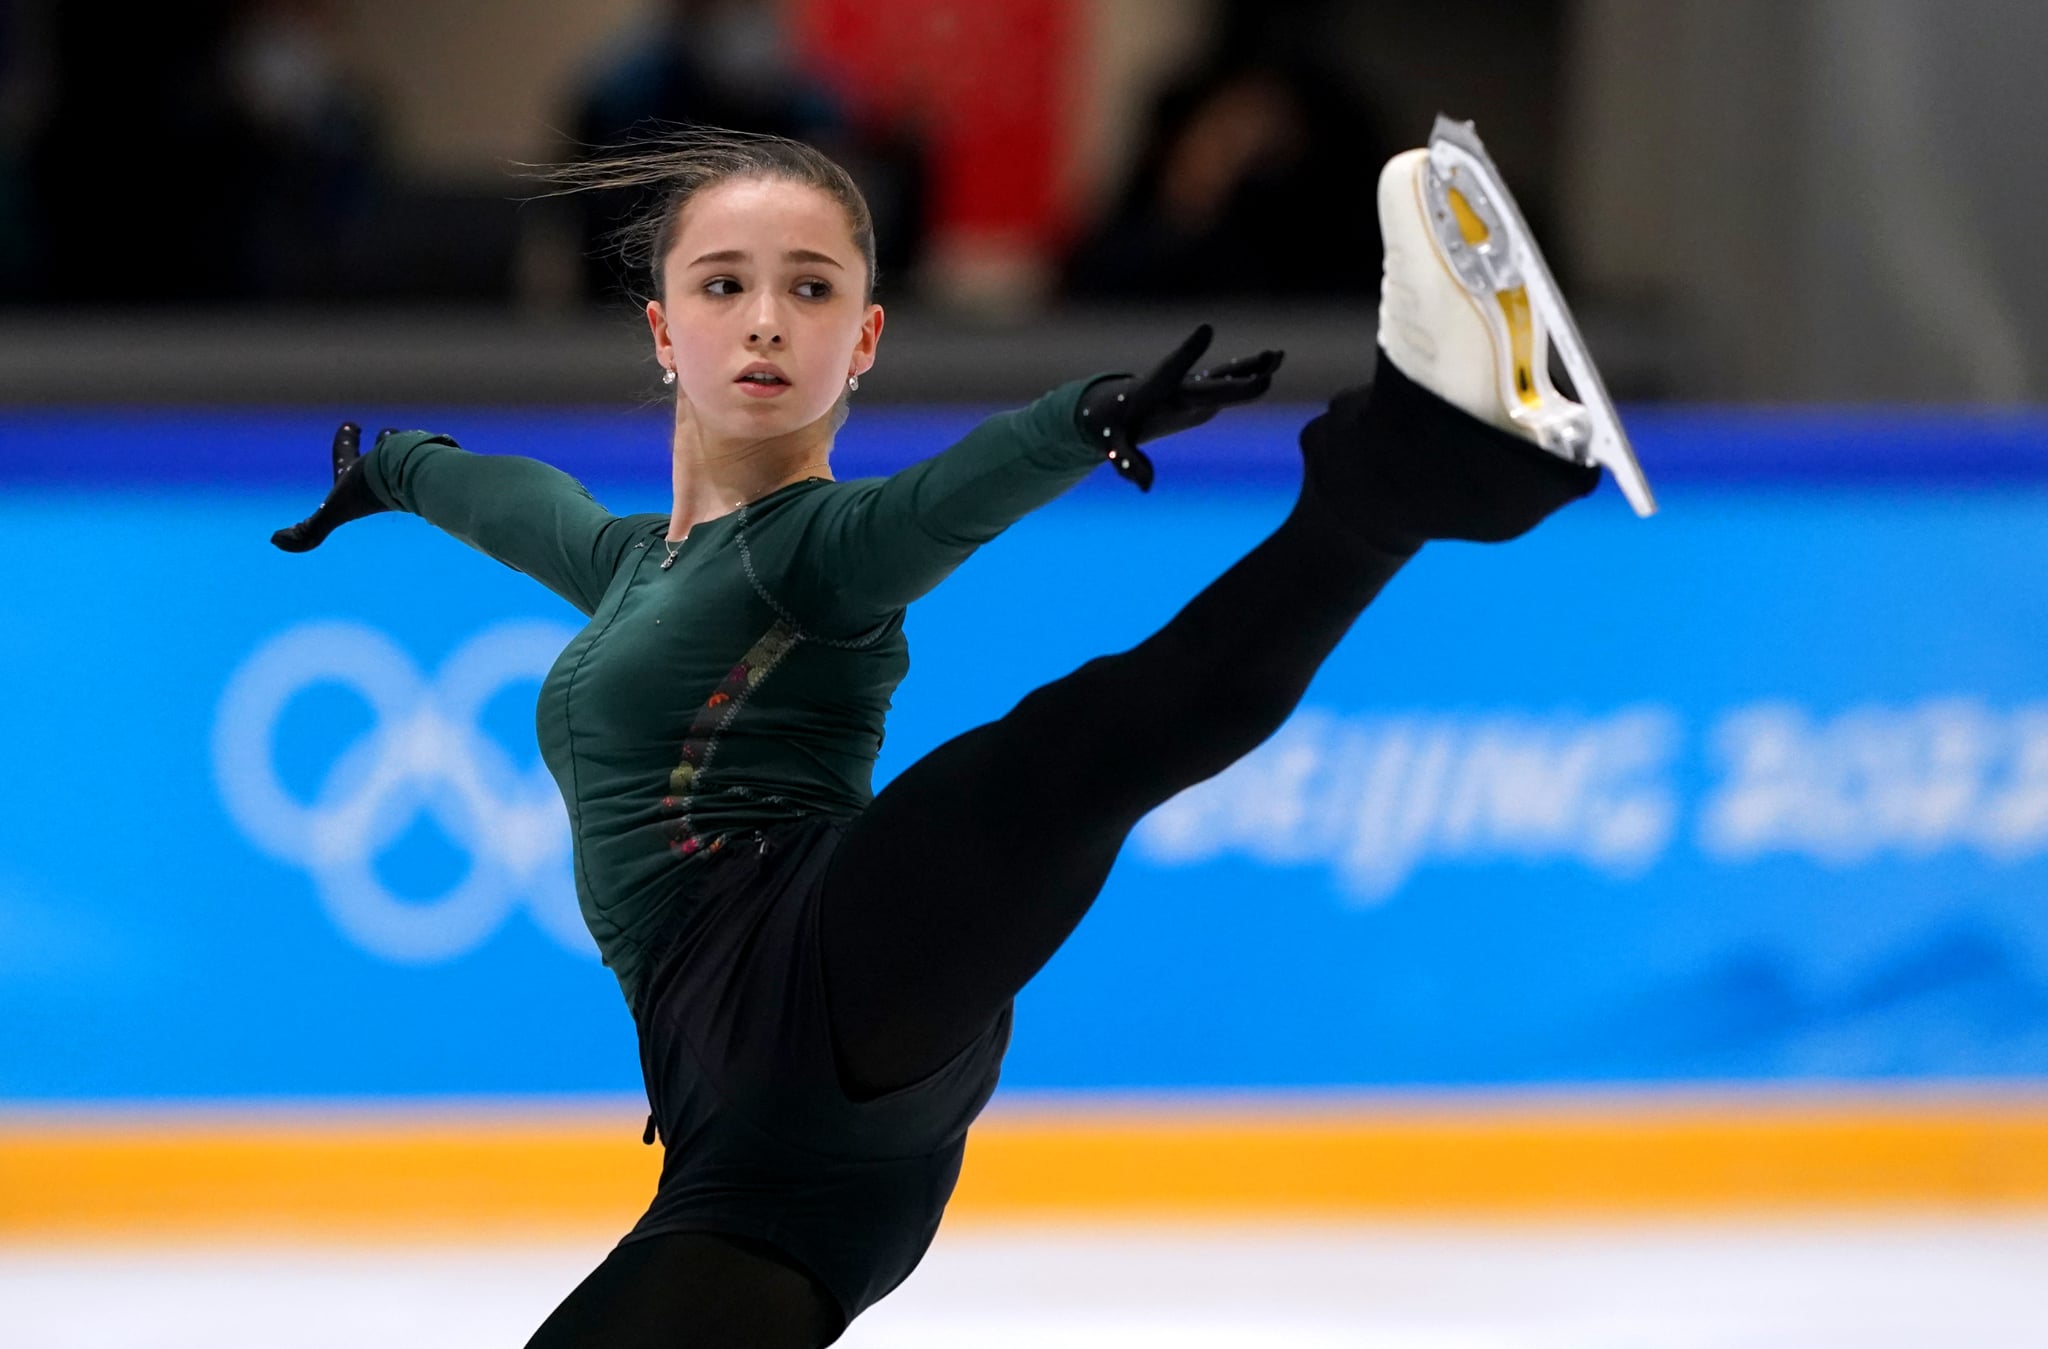 ROC's Kamila Valieva during a training session on day nine of the Beijing 2022 Winter Olympic Games at the Capital Indoor Stadium in China. Picture date: Sunday February 13, 2022. (Photo by Andrew Milligan/PA Images via Getty Images)